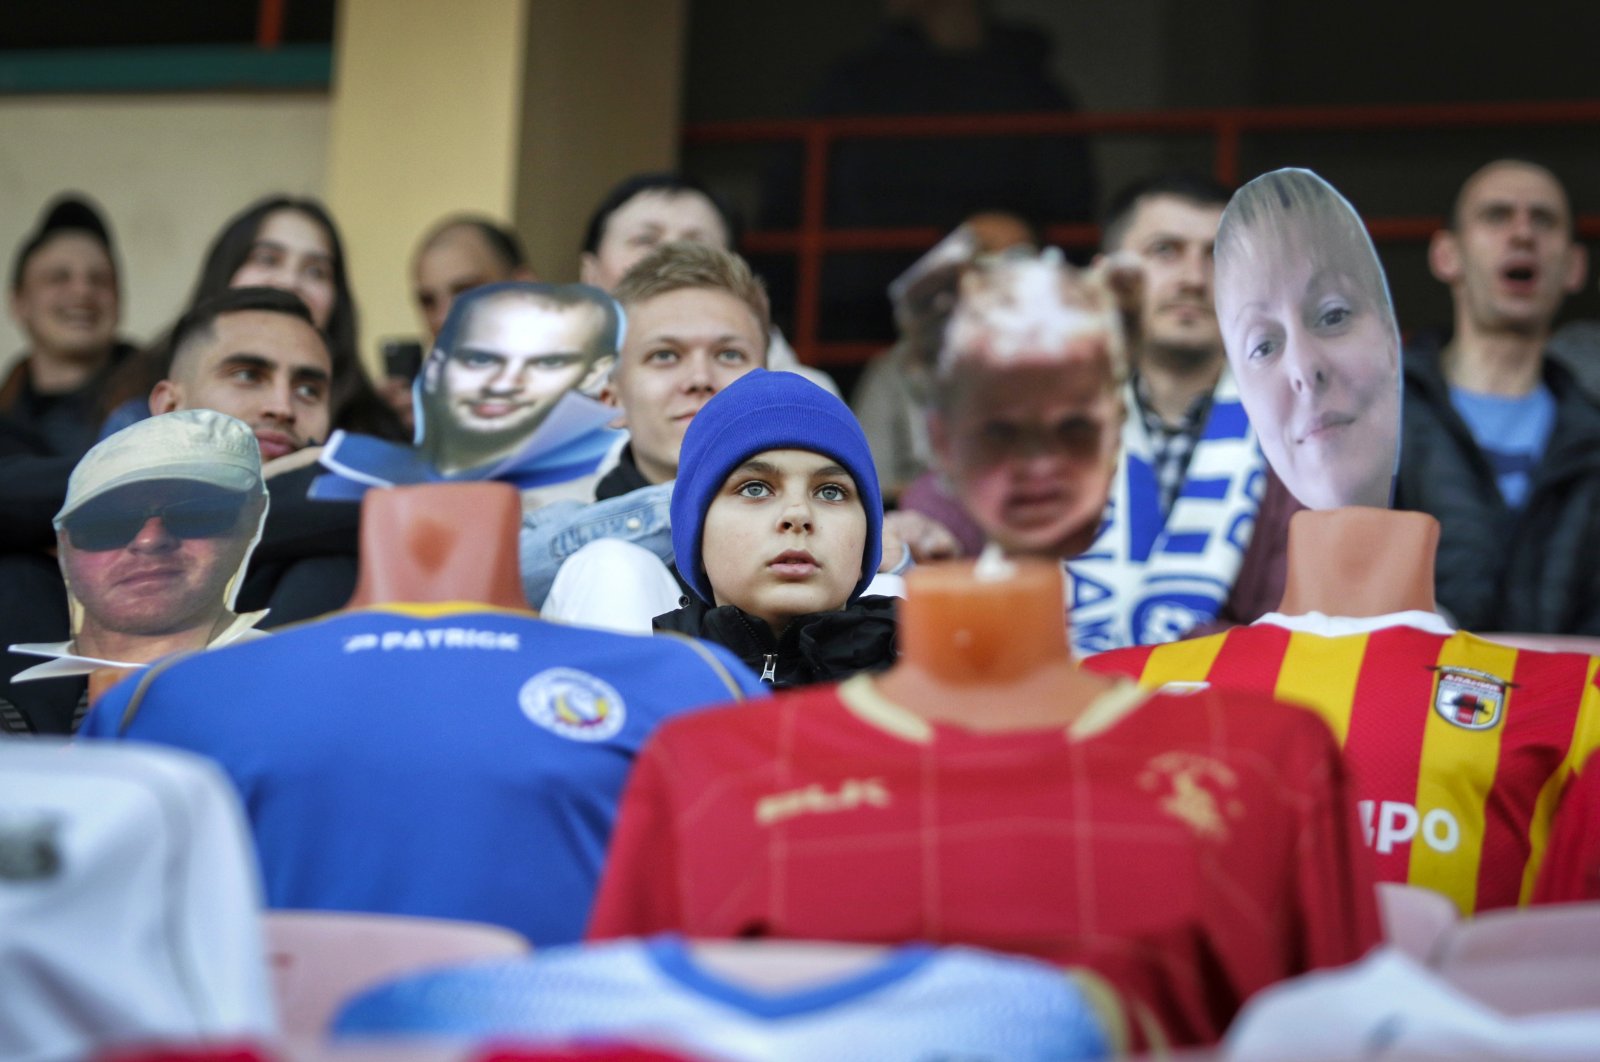 Fans sit in the stands among mannequins in football uniforms with the faces of "virtual fans" who bought tickets online during the match between FC Dynamo Brest and FC Shakhter Soligorsk in Brest, Belarus, April 8, 2020. (AP Photo)